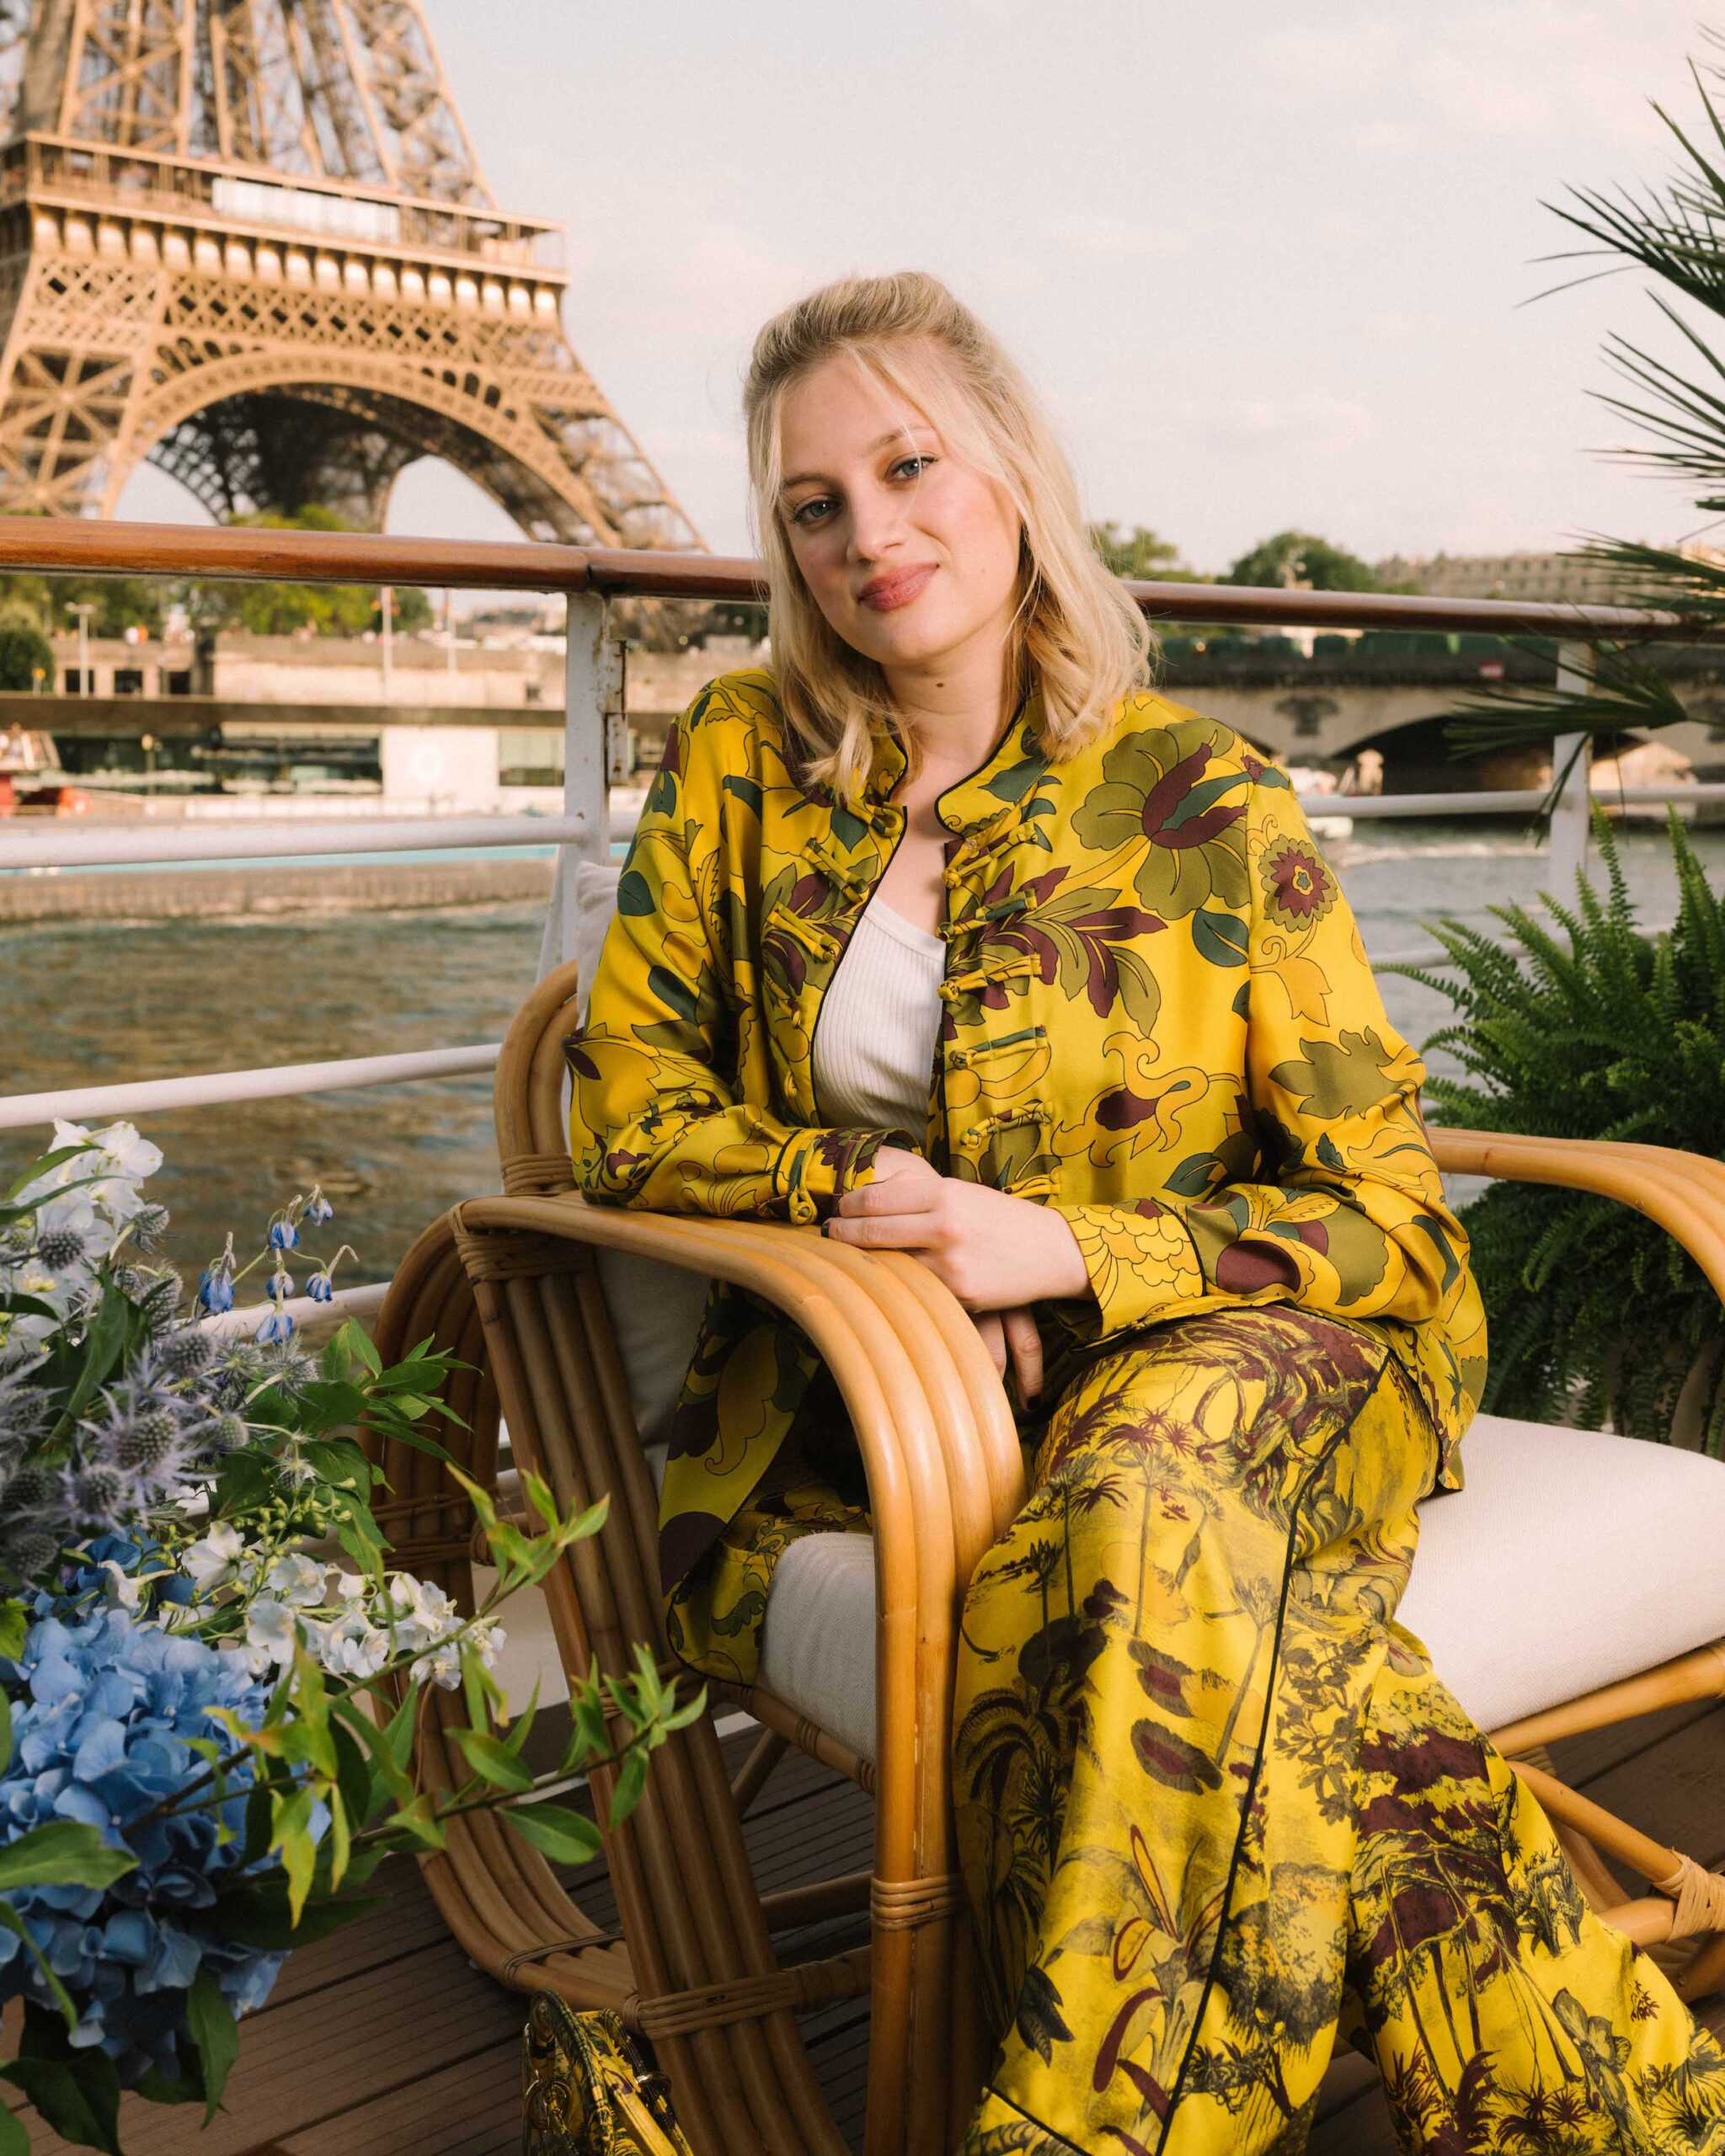 Nadia Tereszkiewicz in Dior Pre Fall 2023 Nadia Tereszkiewicz opted for a bold and playful look, wearing a printed yellow silk shirt and pants from the Dior Pre Fall 2023 collection. She paired it with a white cotton top.